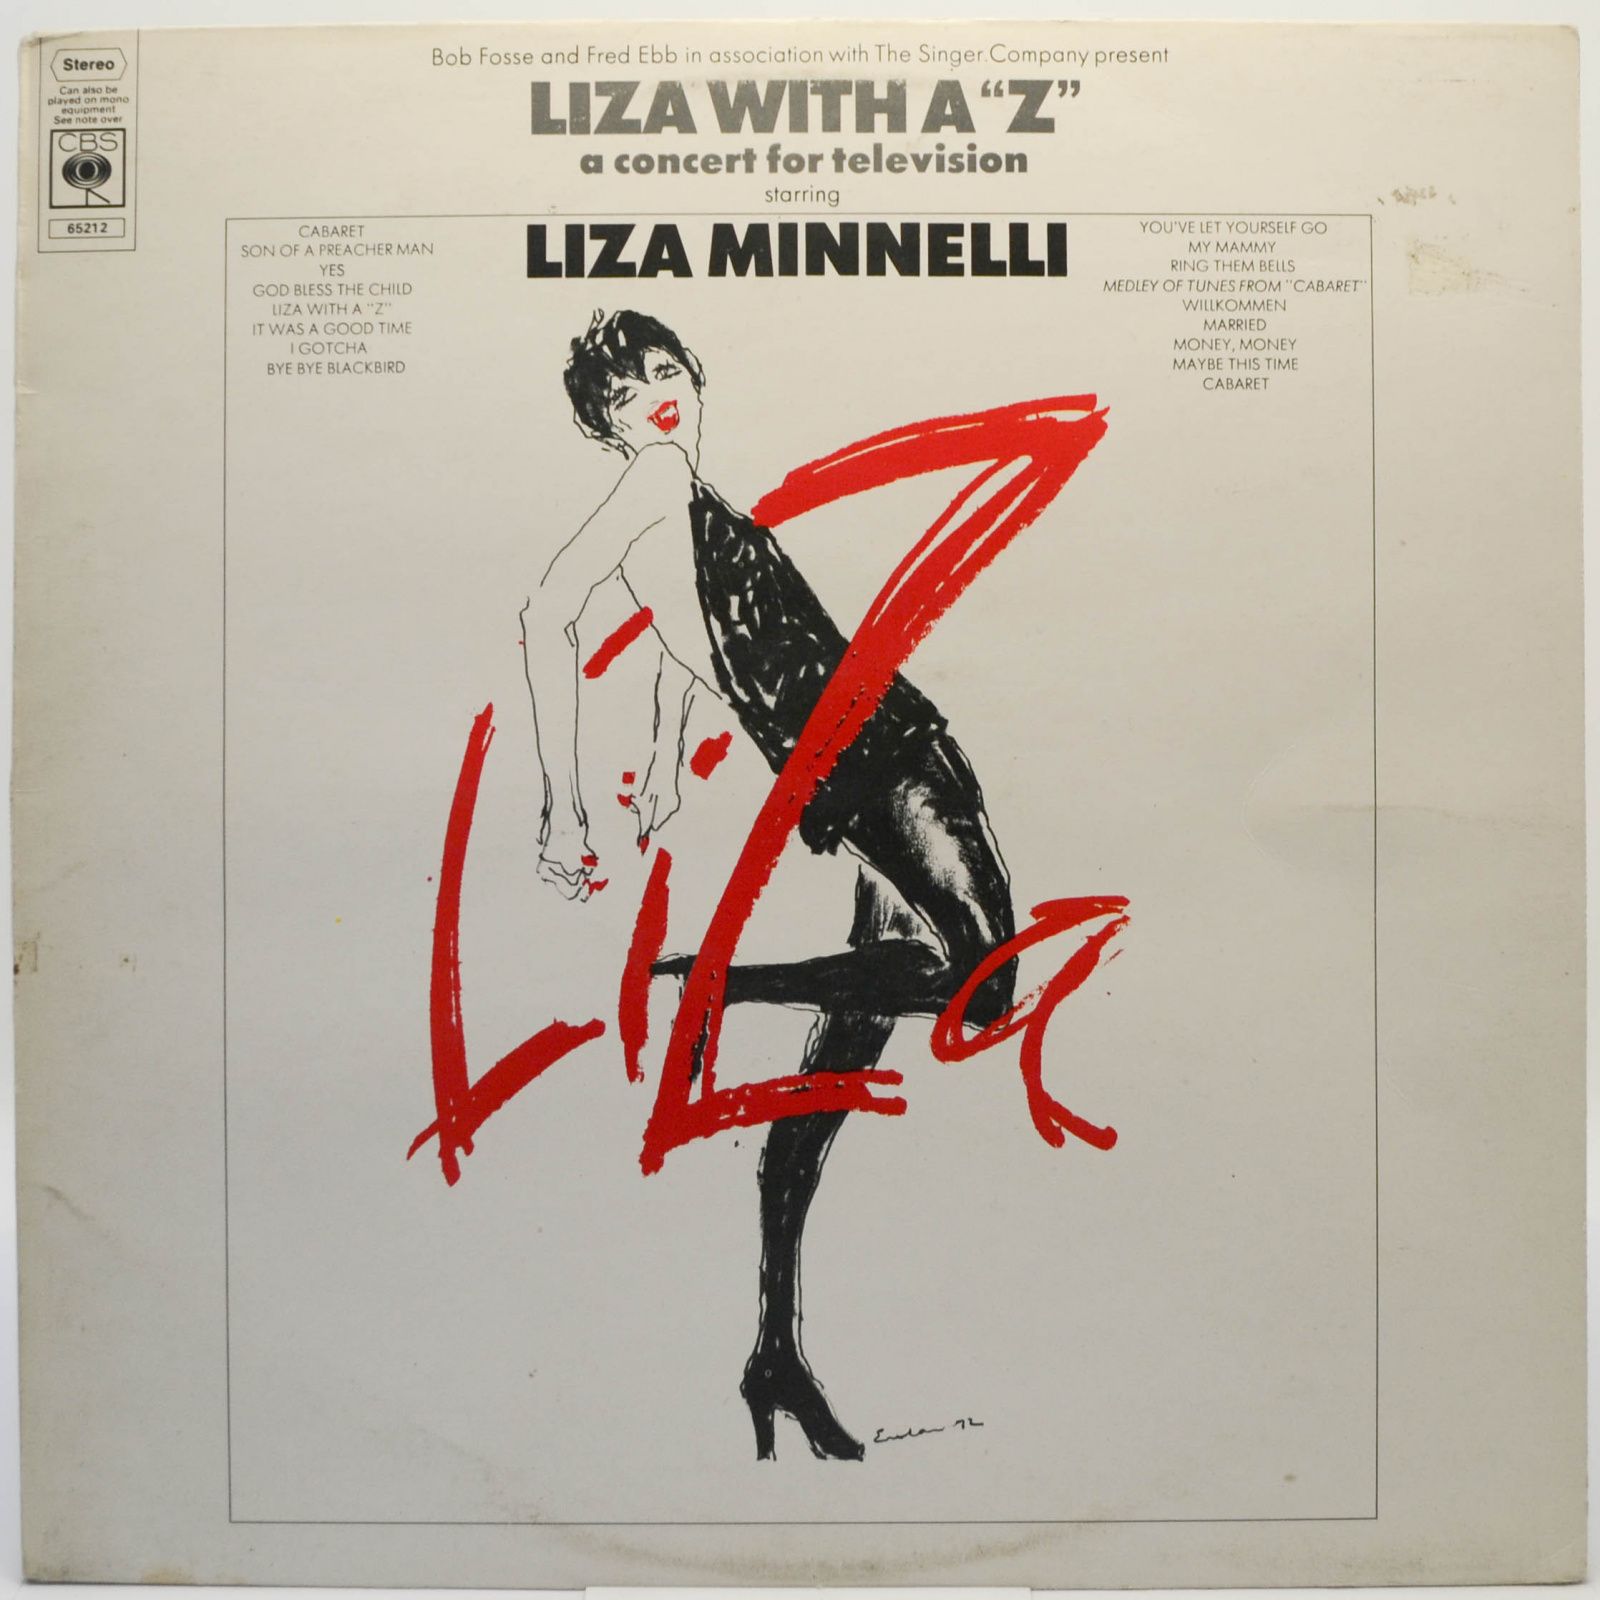 Liza Minnelli — Liza With A ‘Z’. A Concert For Television, 1972